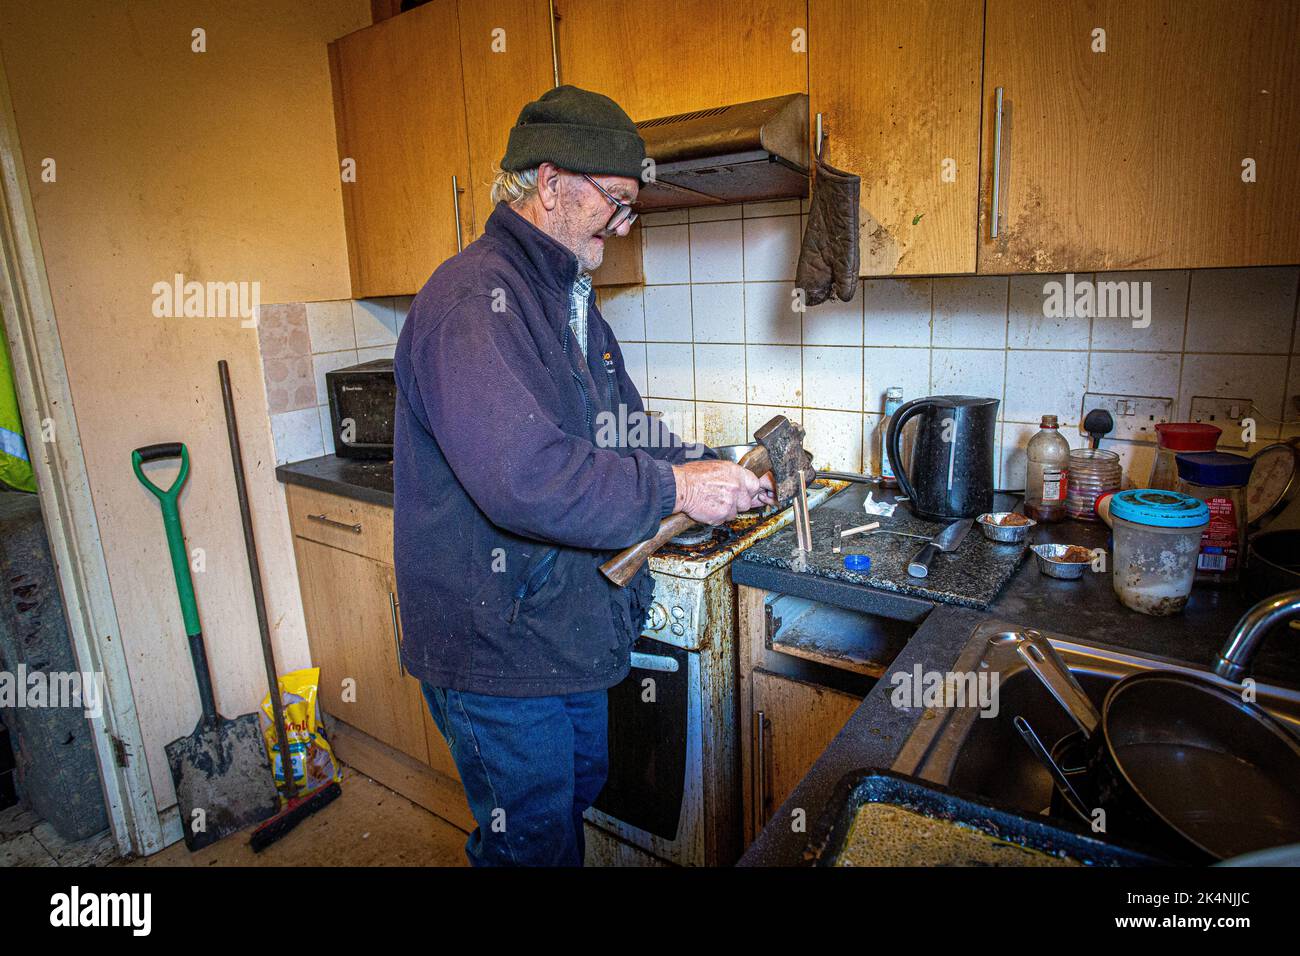 London, UK. Sept 29 2022 .Man chops firewood with an axe in his kitchen Stock Photo